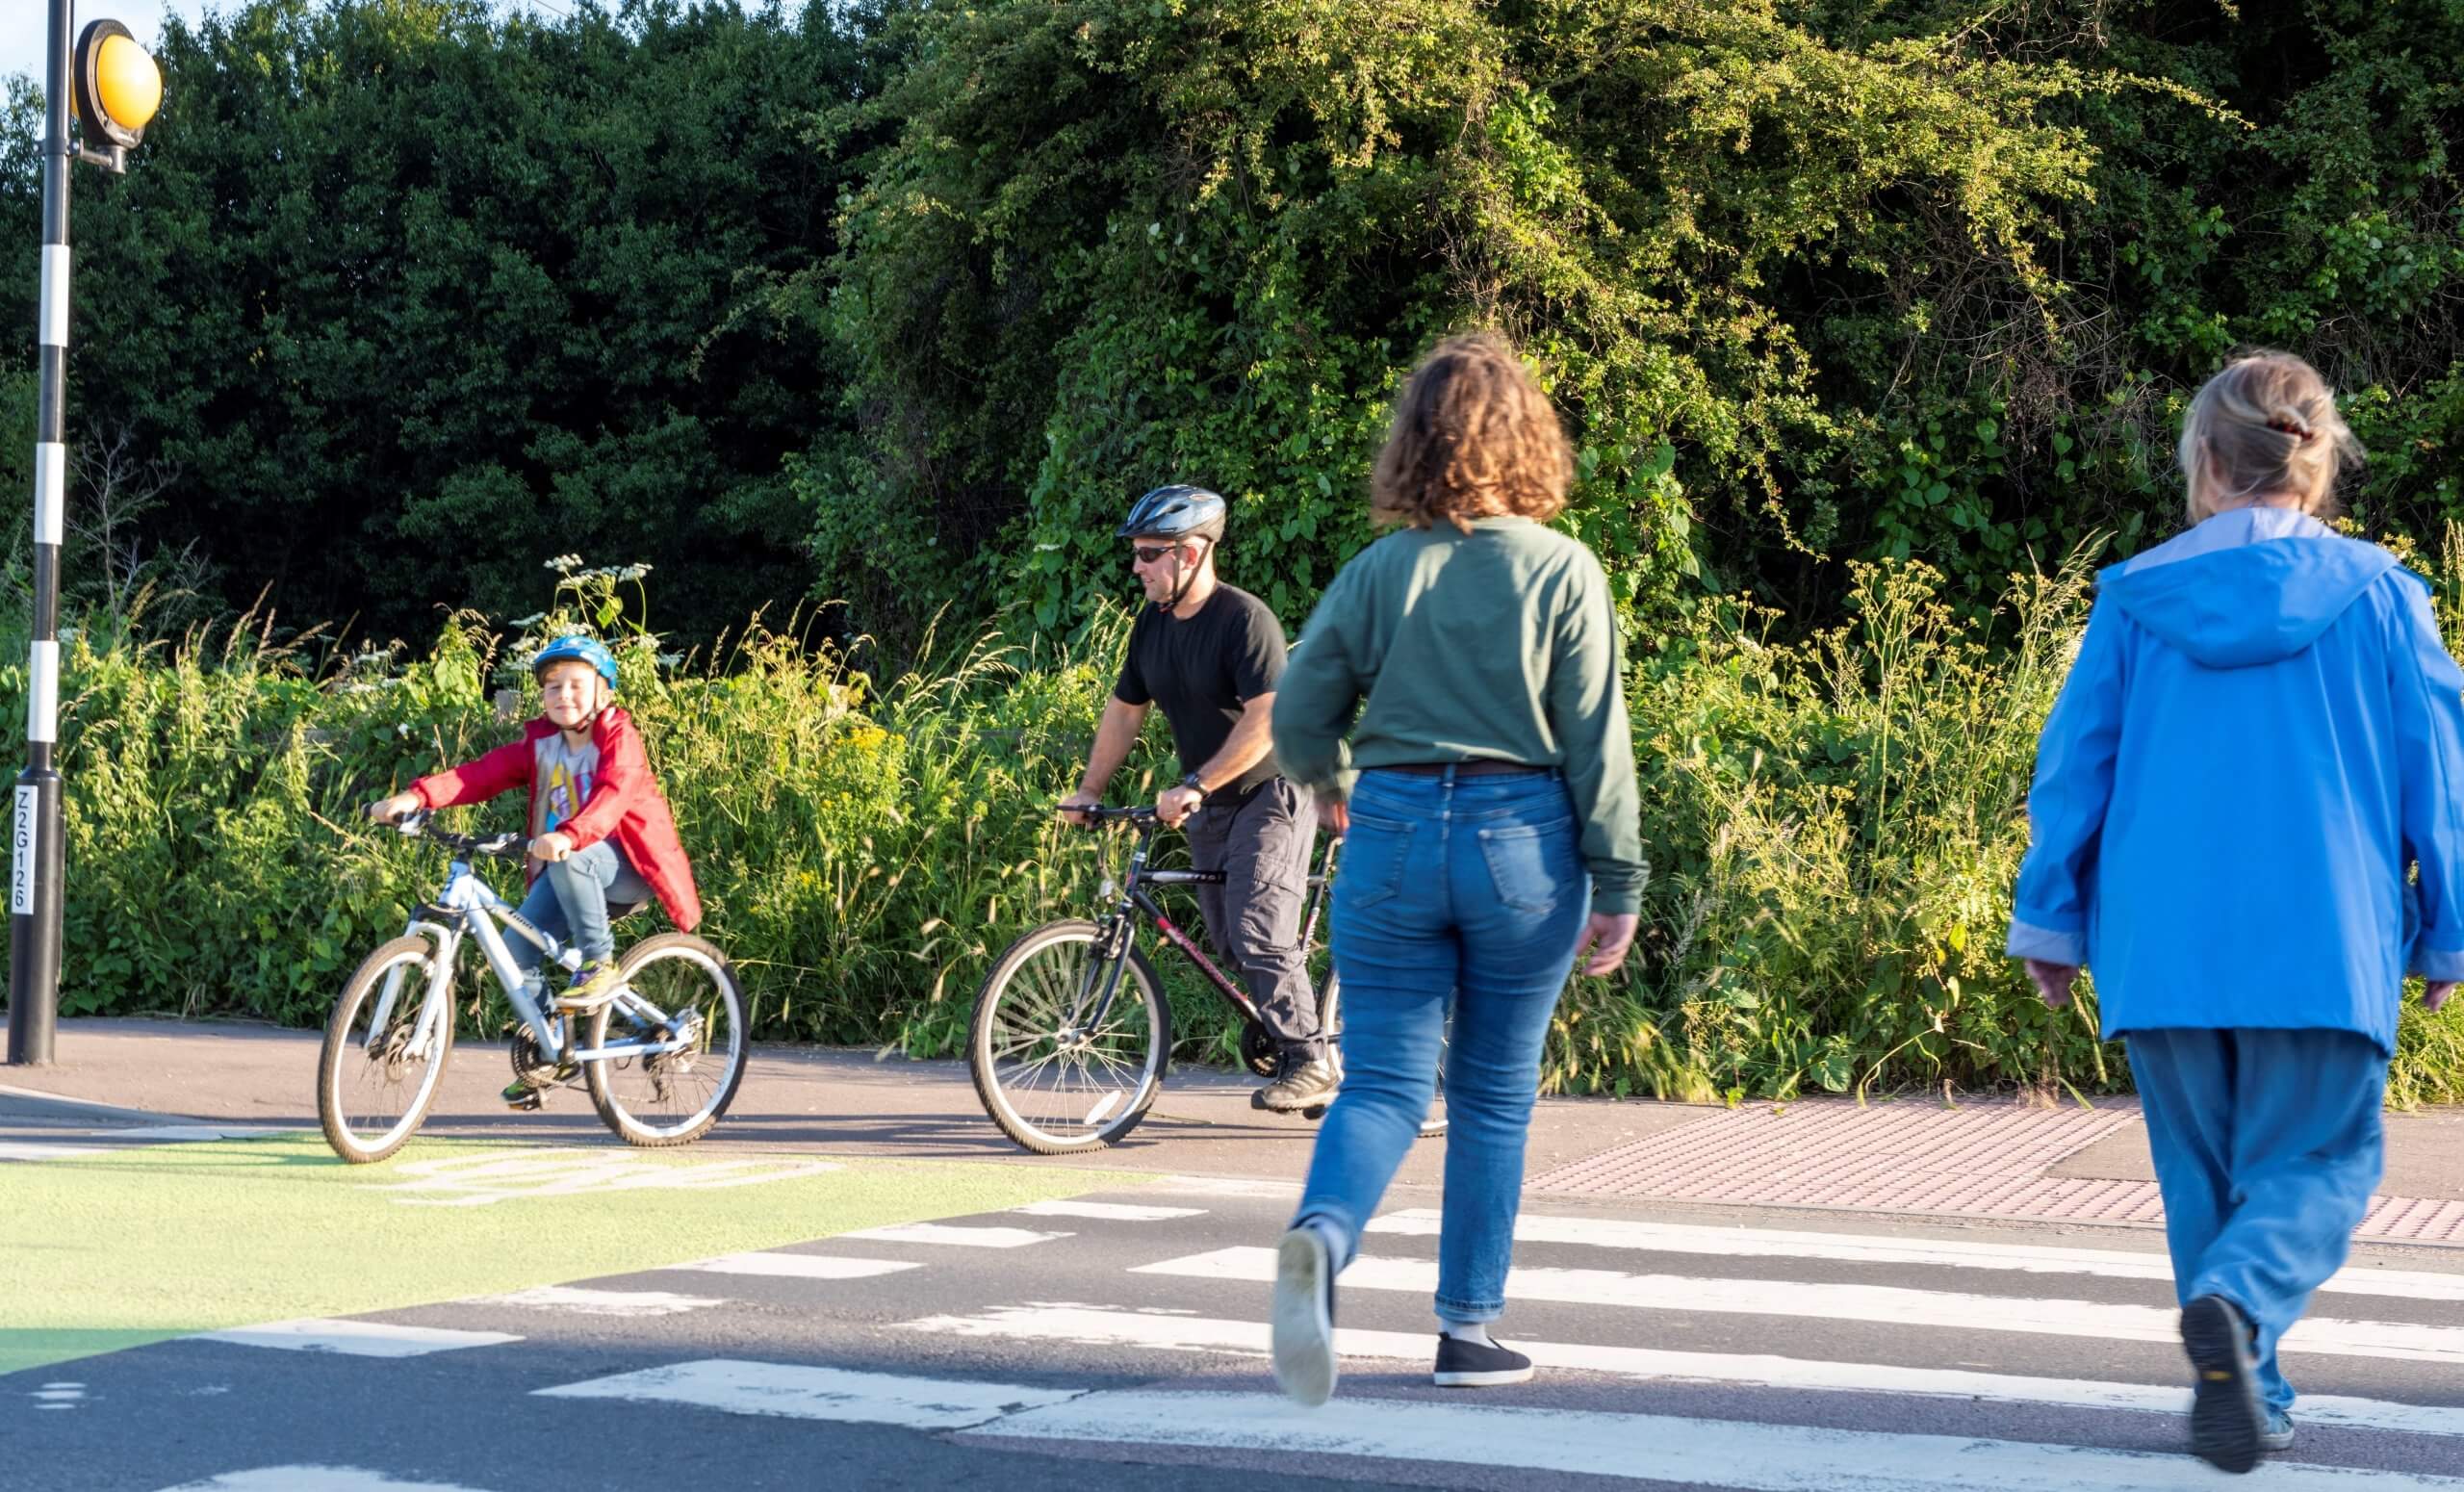 Pedestrians and cyclists crossing on a toucan crossing